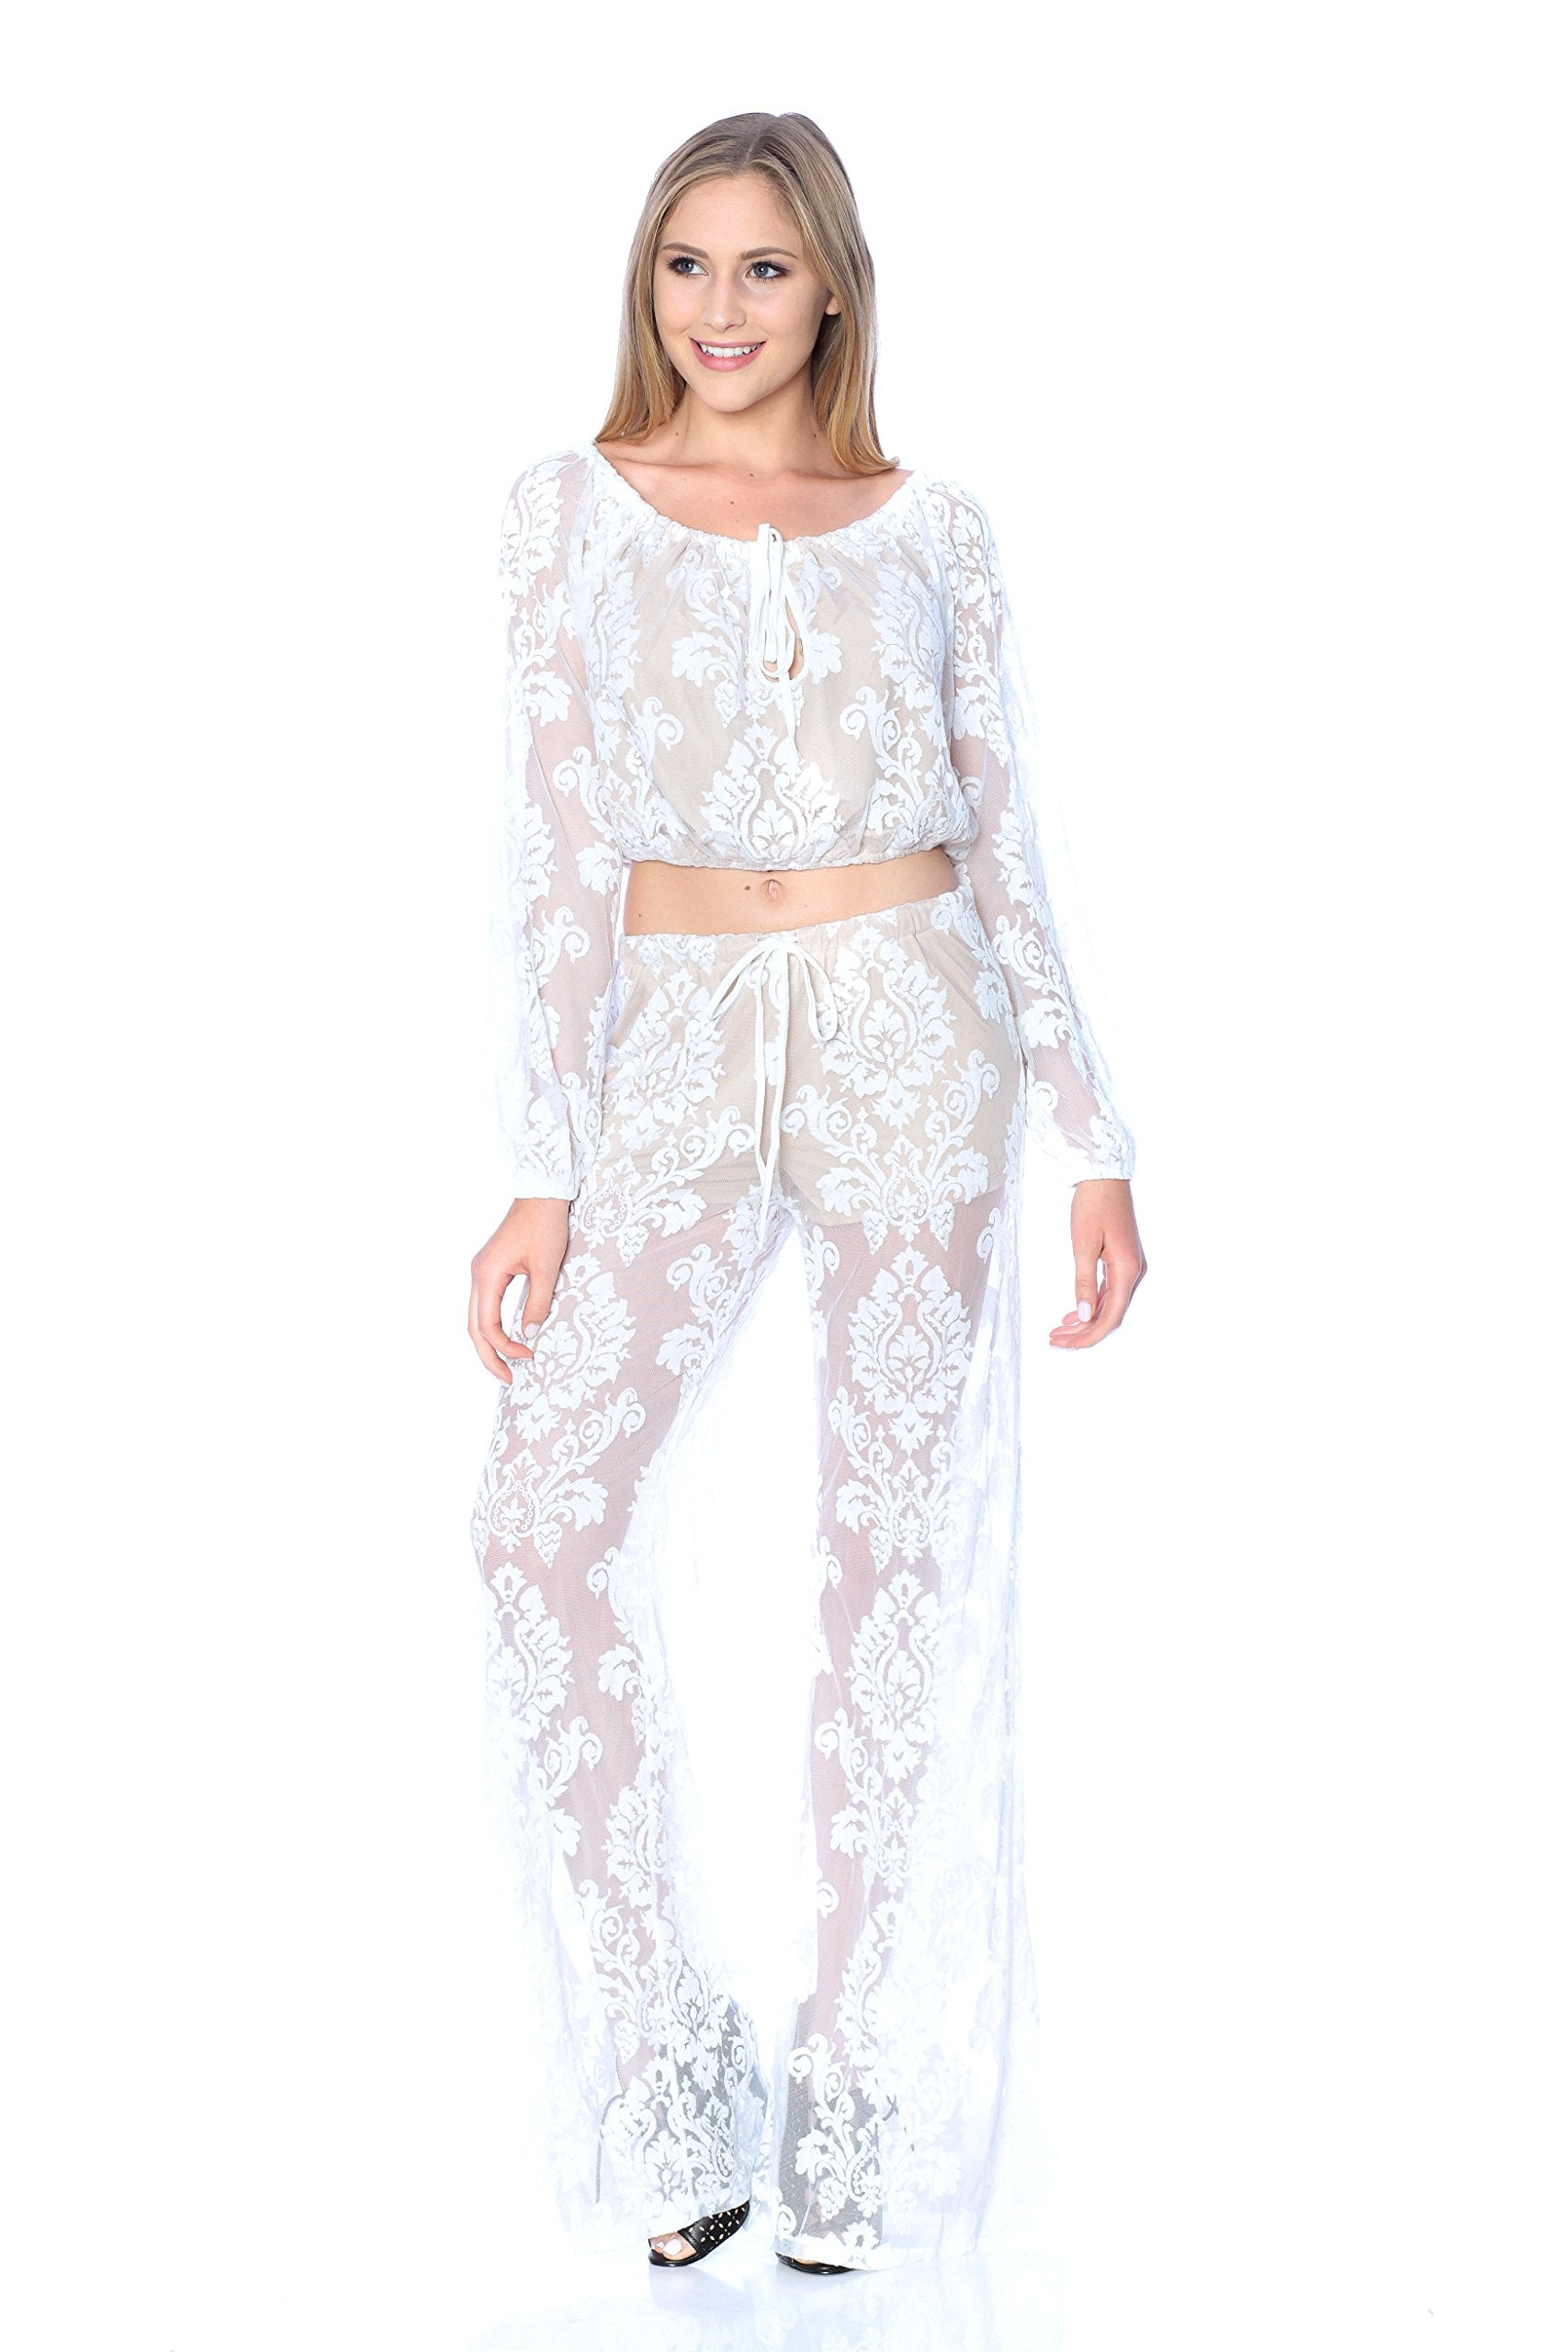 Long Sleeve Lace Crop Top (Large, Ivory)